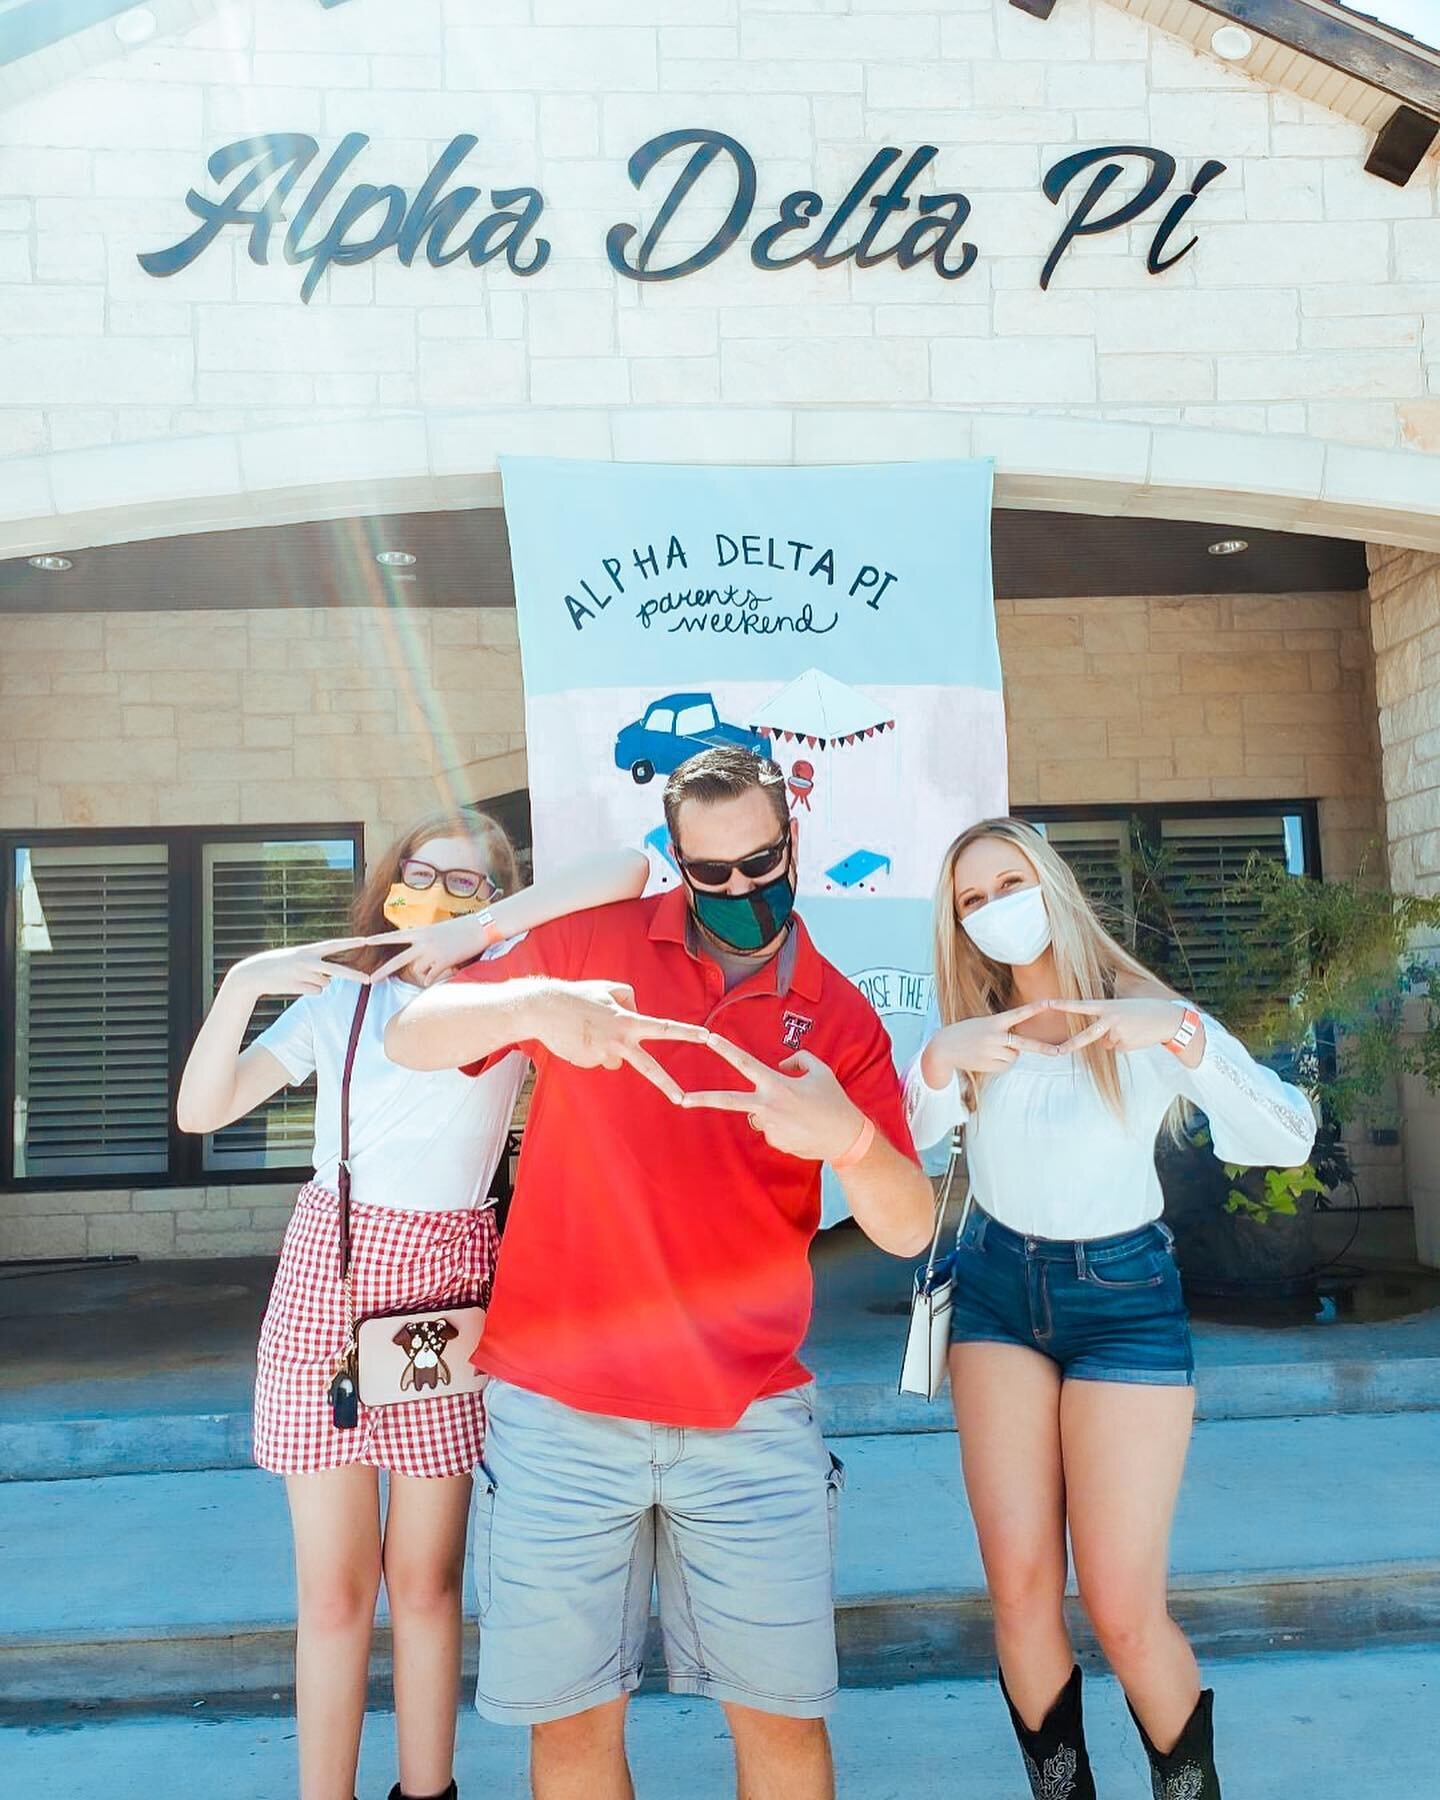 Reminiscing on ADPi Parent&rsquo;s Weekend! We had a blast having our families come to the 806! ❤️★🖤🏈

#adpiishome #bethefirst #techadpi #texasadpiproud #wreckem